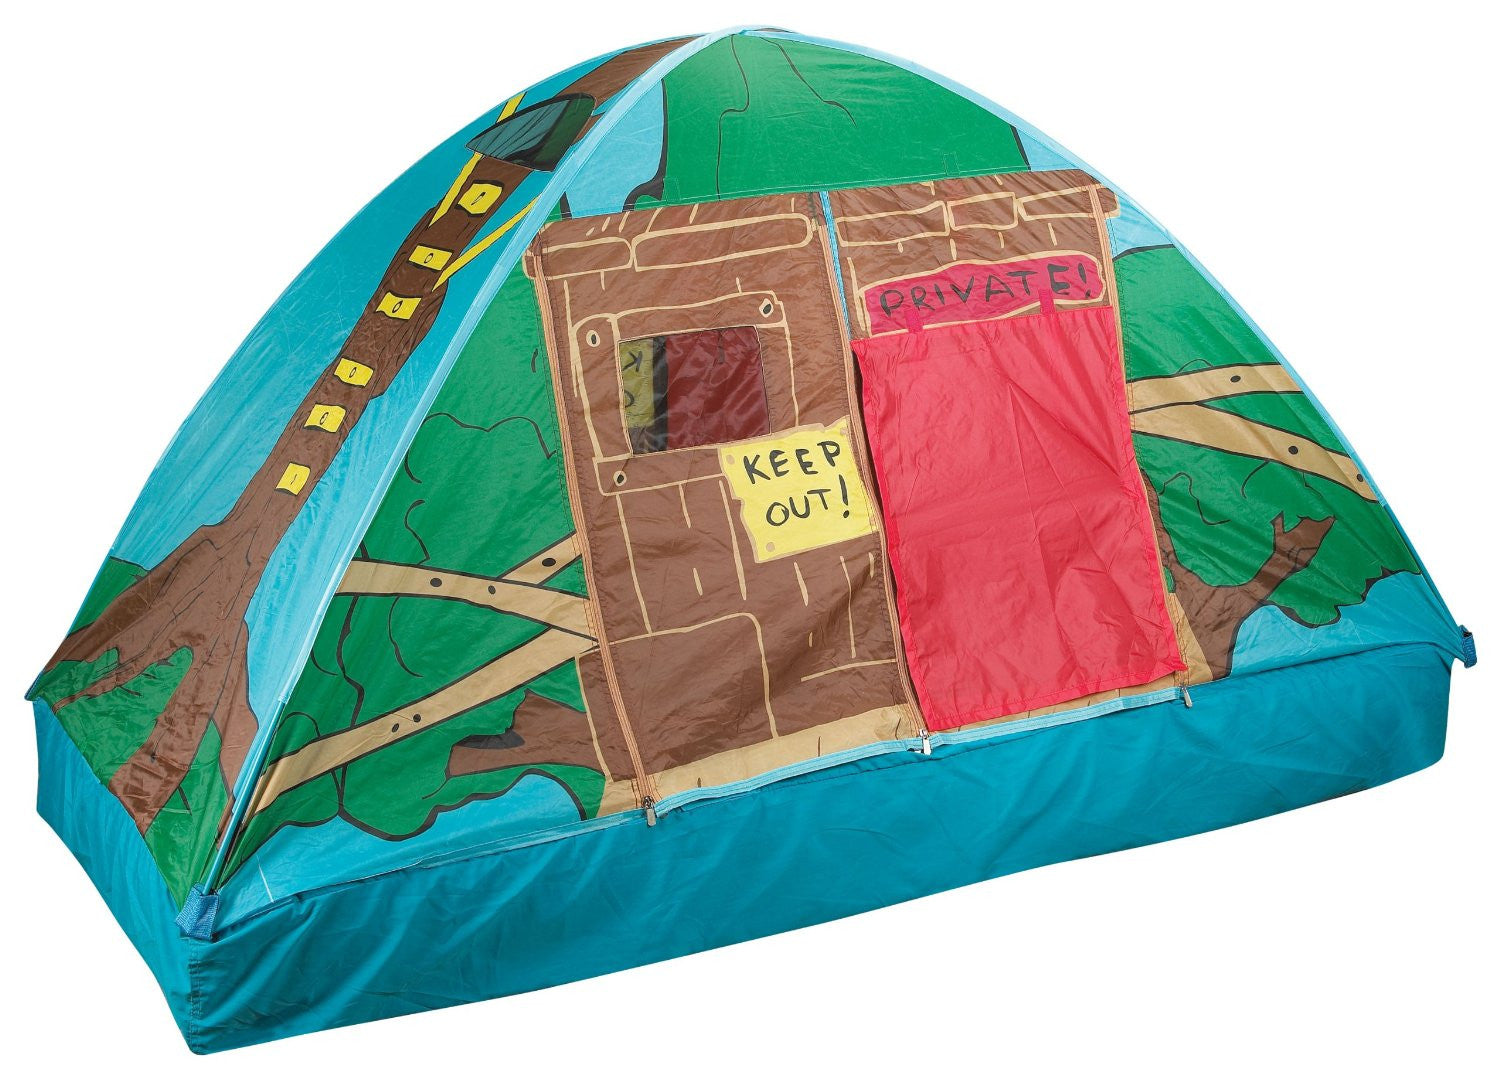 Pacific Play Tents 19790 Tree House Bed Tent - Twin Size